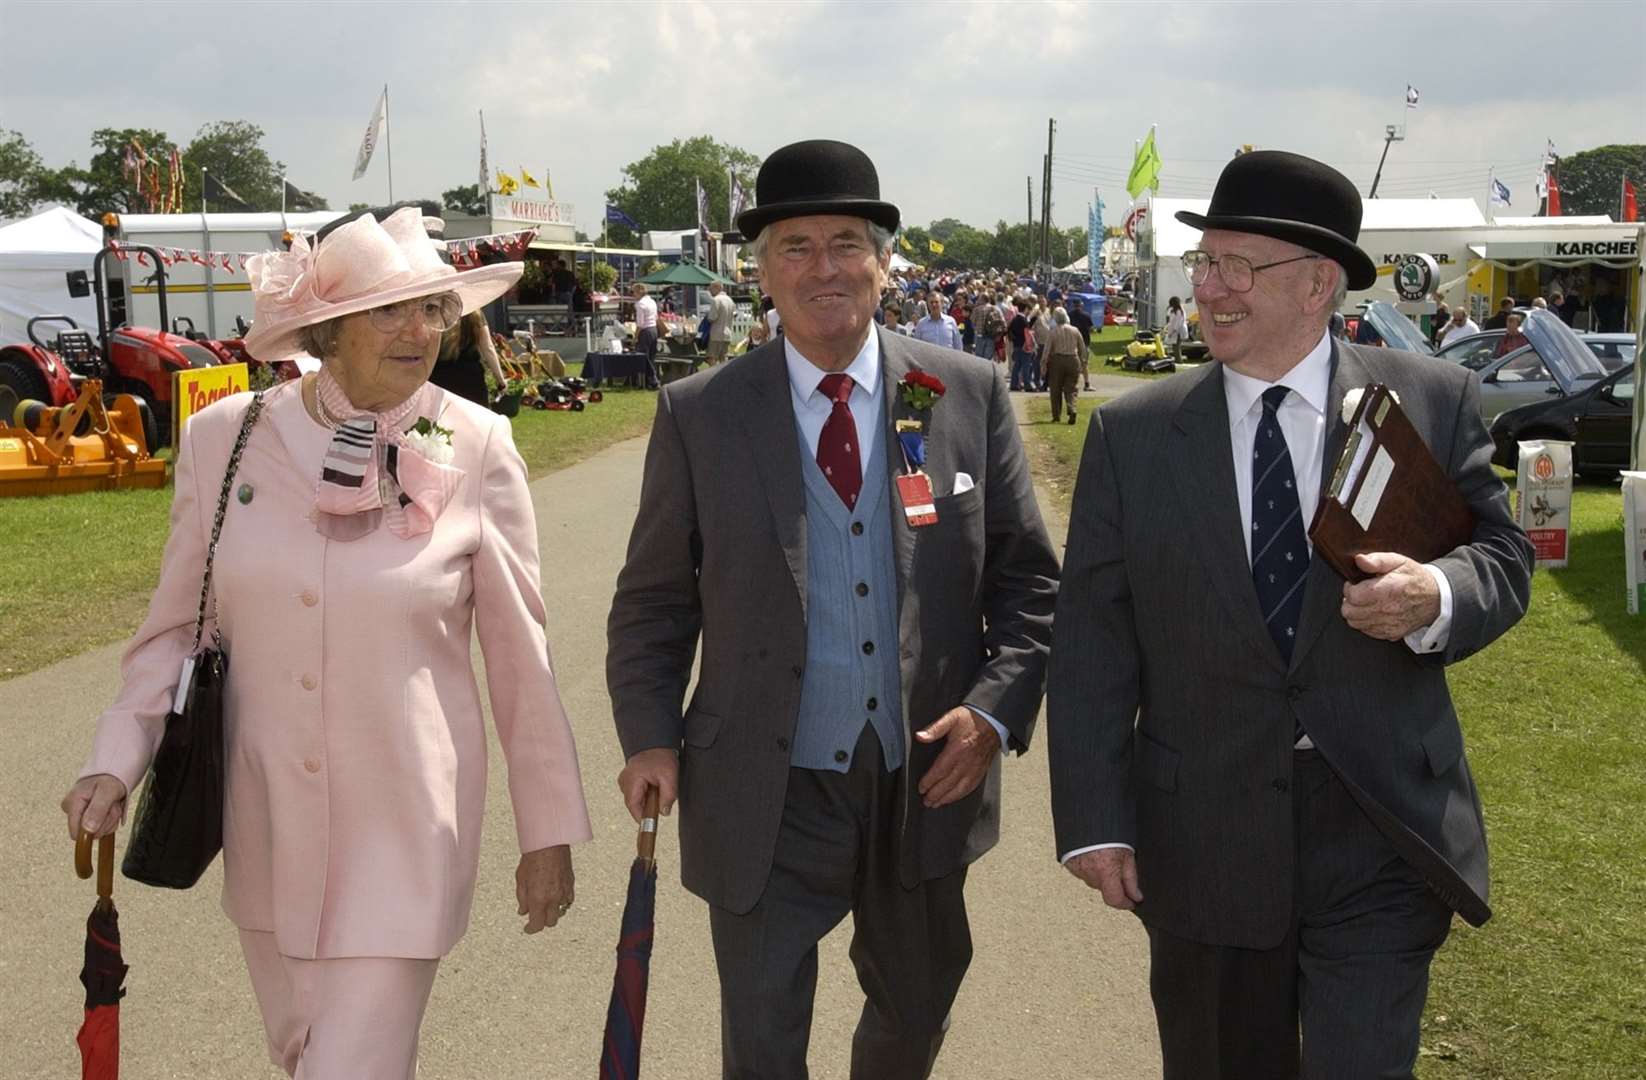 John Jennings (right) with Lord and Lady Kingsdown at the Kent County Show in 2002